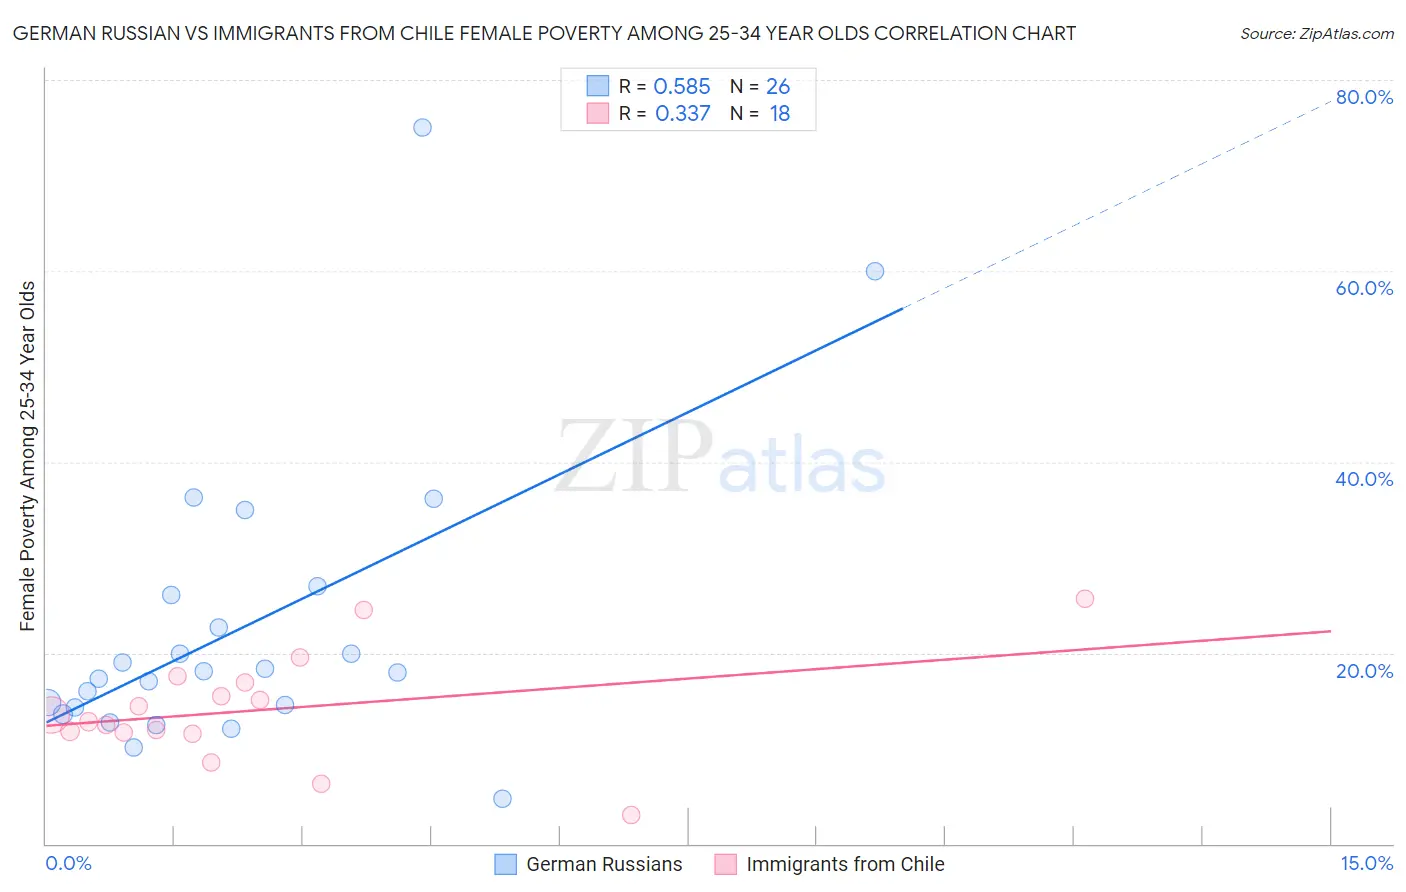 German Russian vs Immigrants from Chile Female Poverty Among 25-34 Year Olds